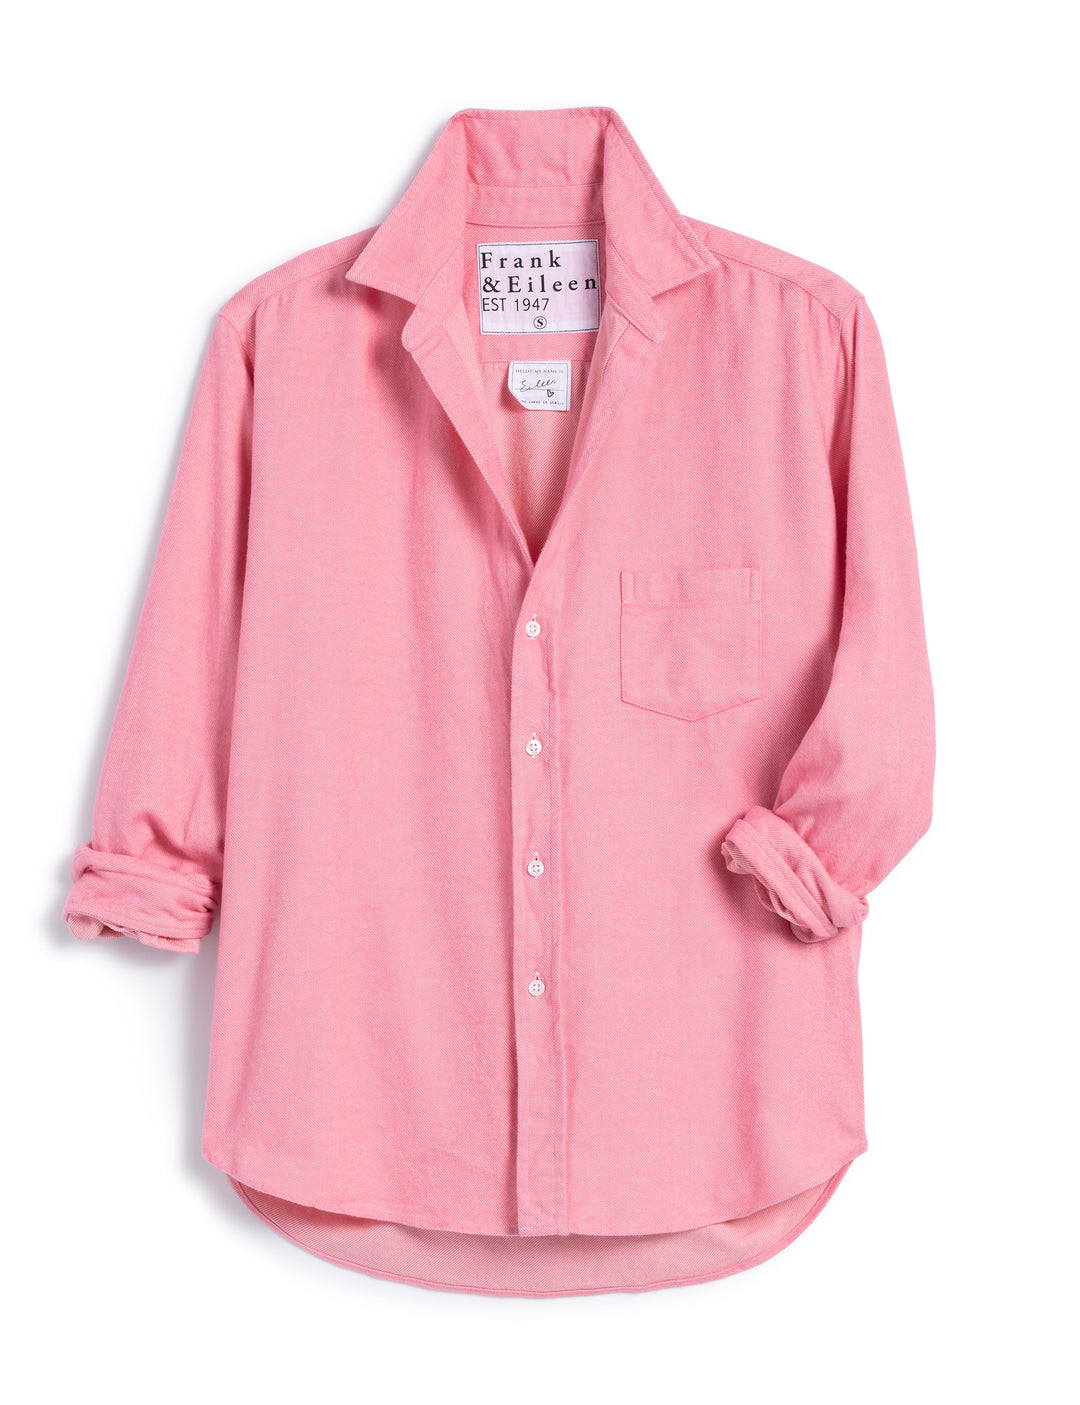 Frank & Eileen - Relaxed Button-Up Shirt in Pink Herringbone